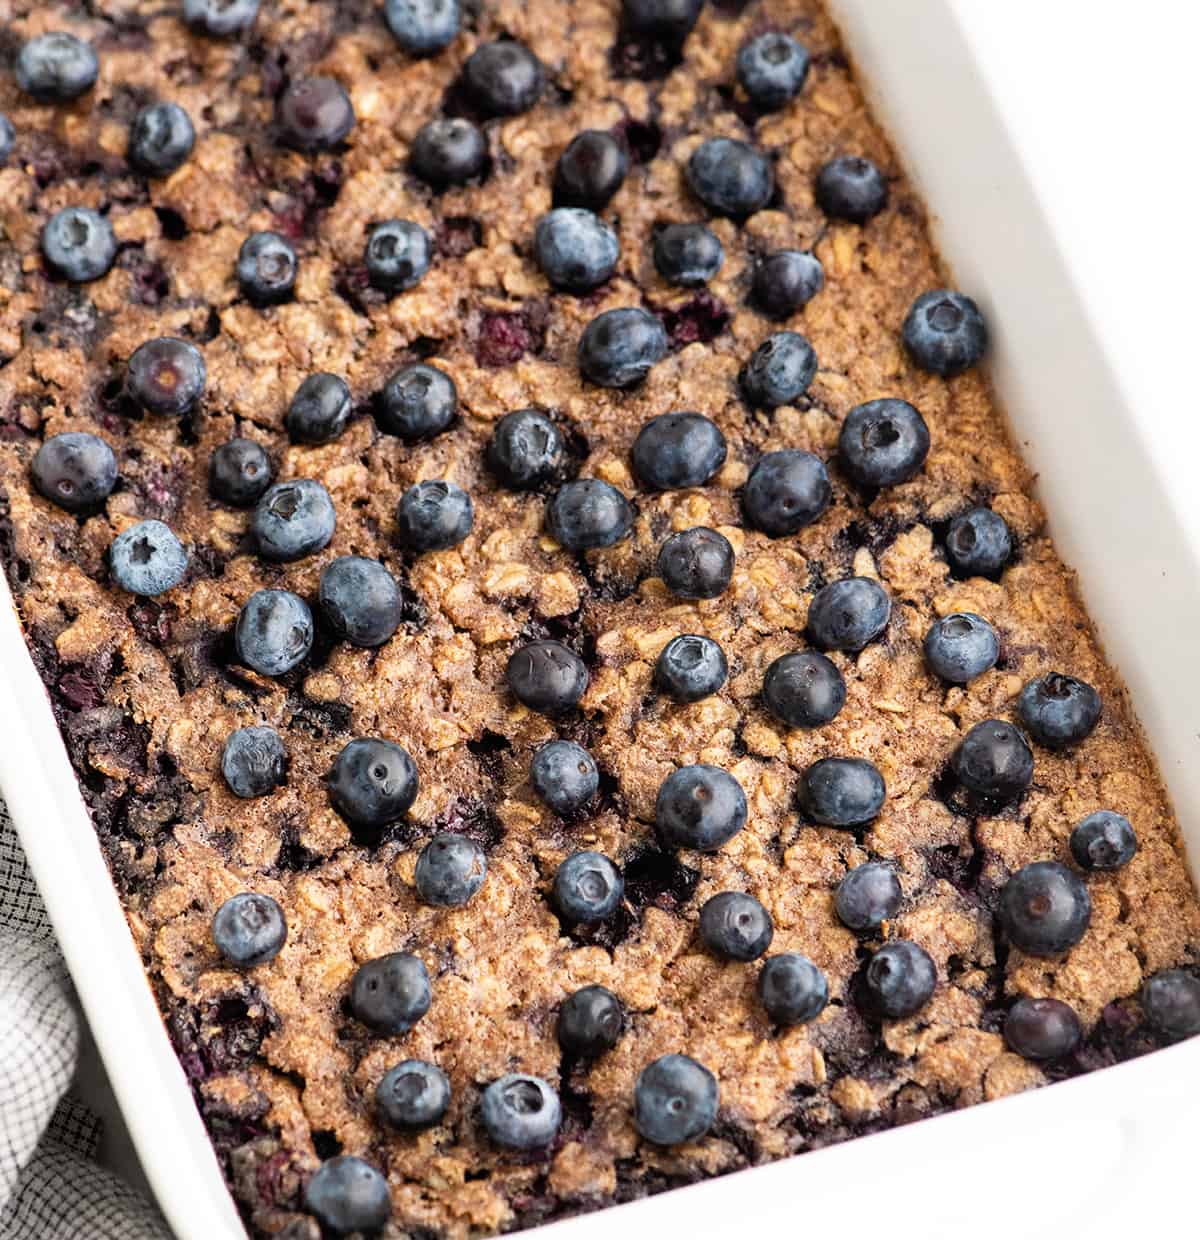 blueberry baked oatmeal in a baking dish topped with blueberries after baking